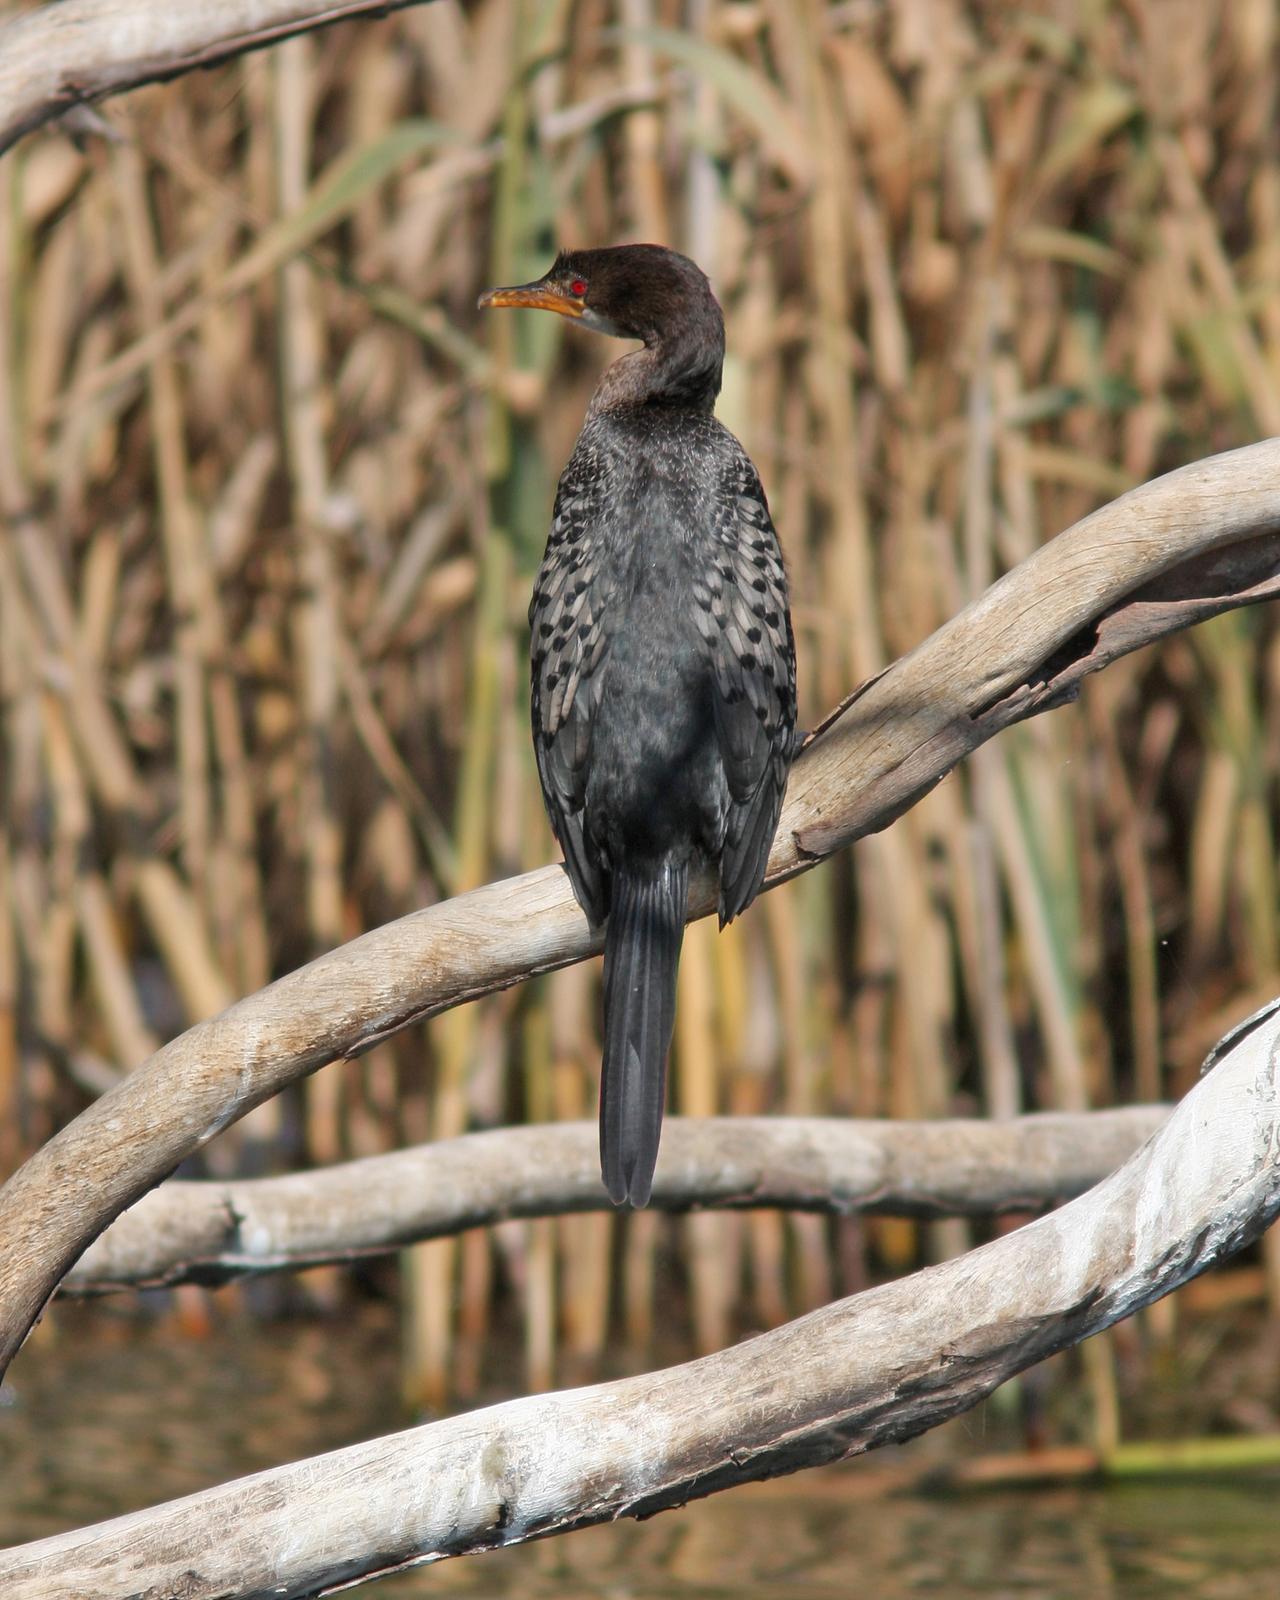 Long-tailed Cormorant Photo by Henk Baptist